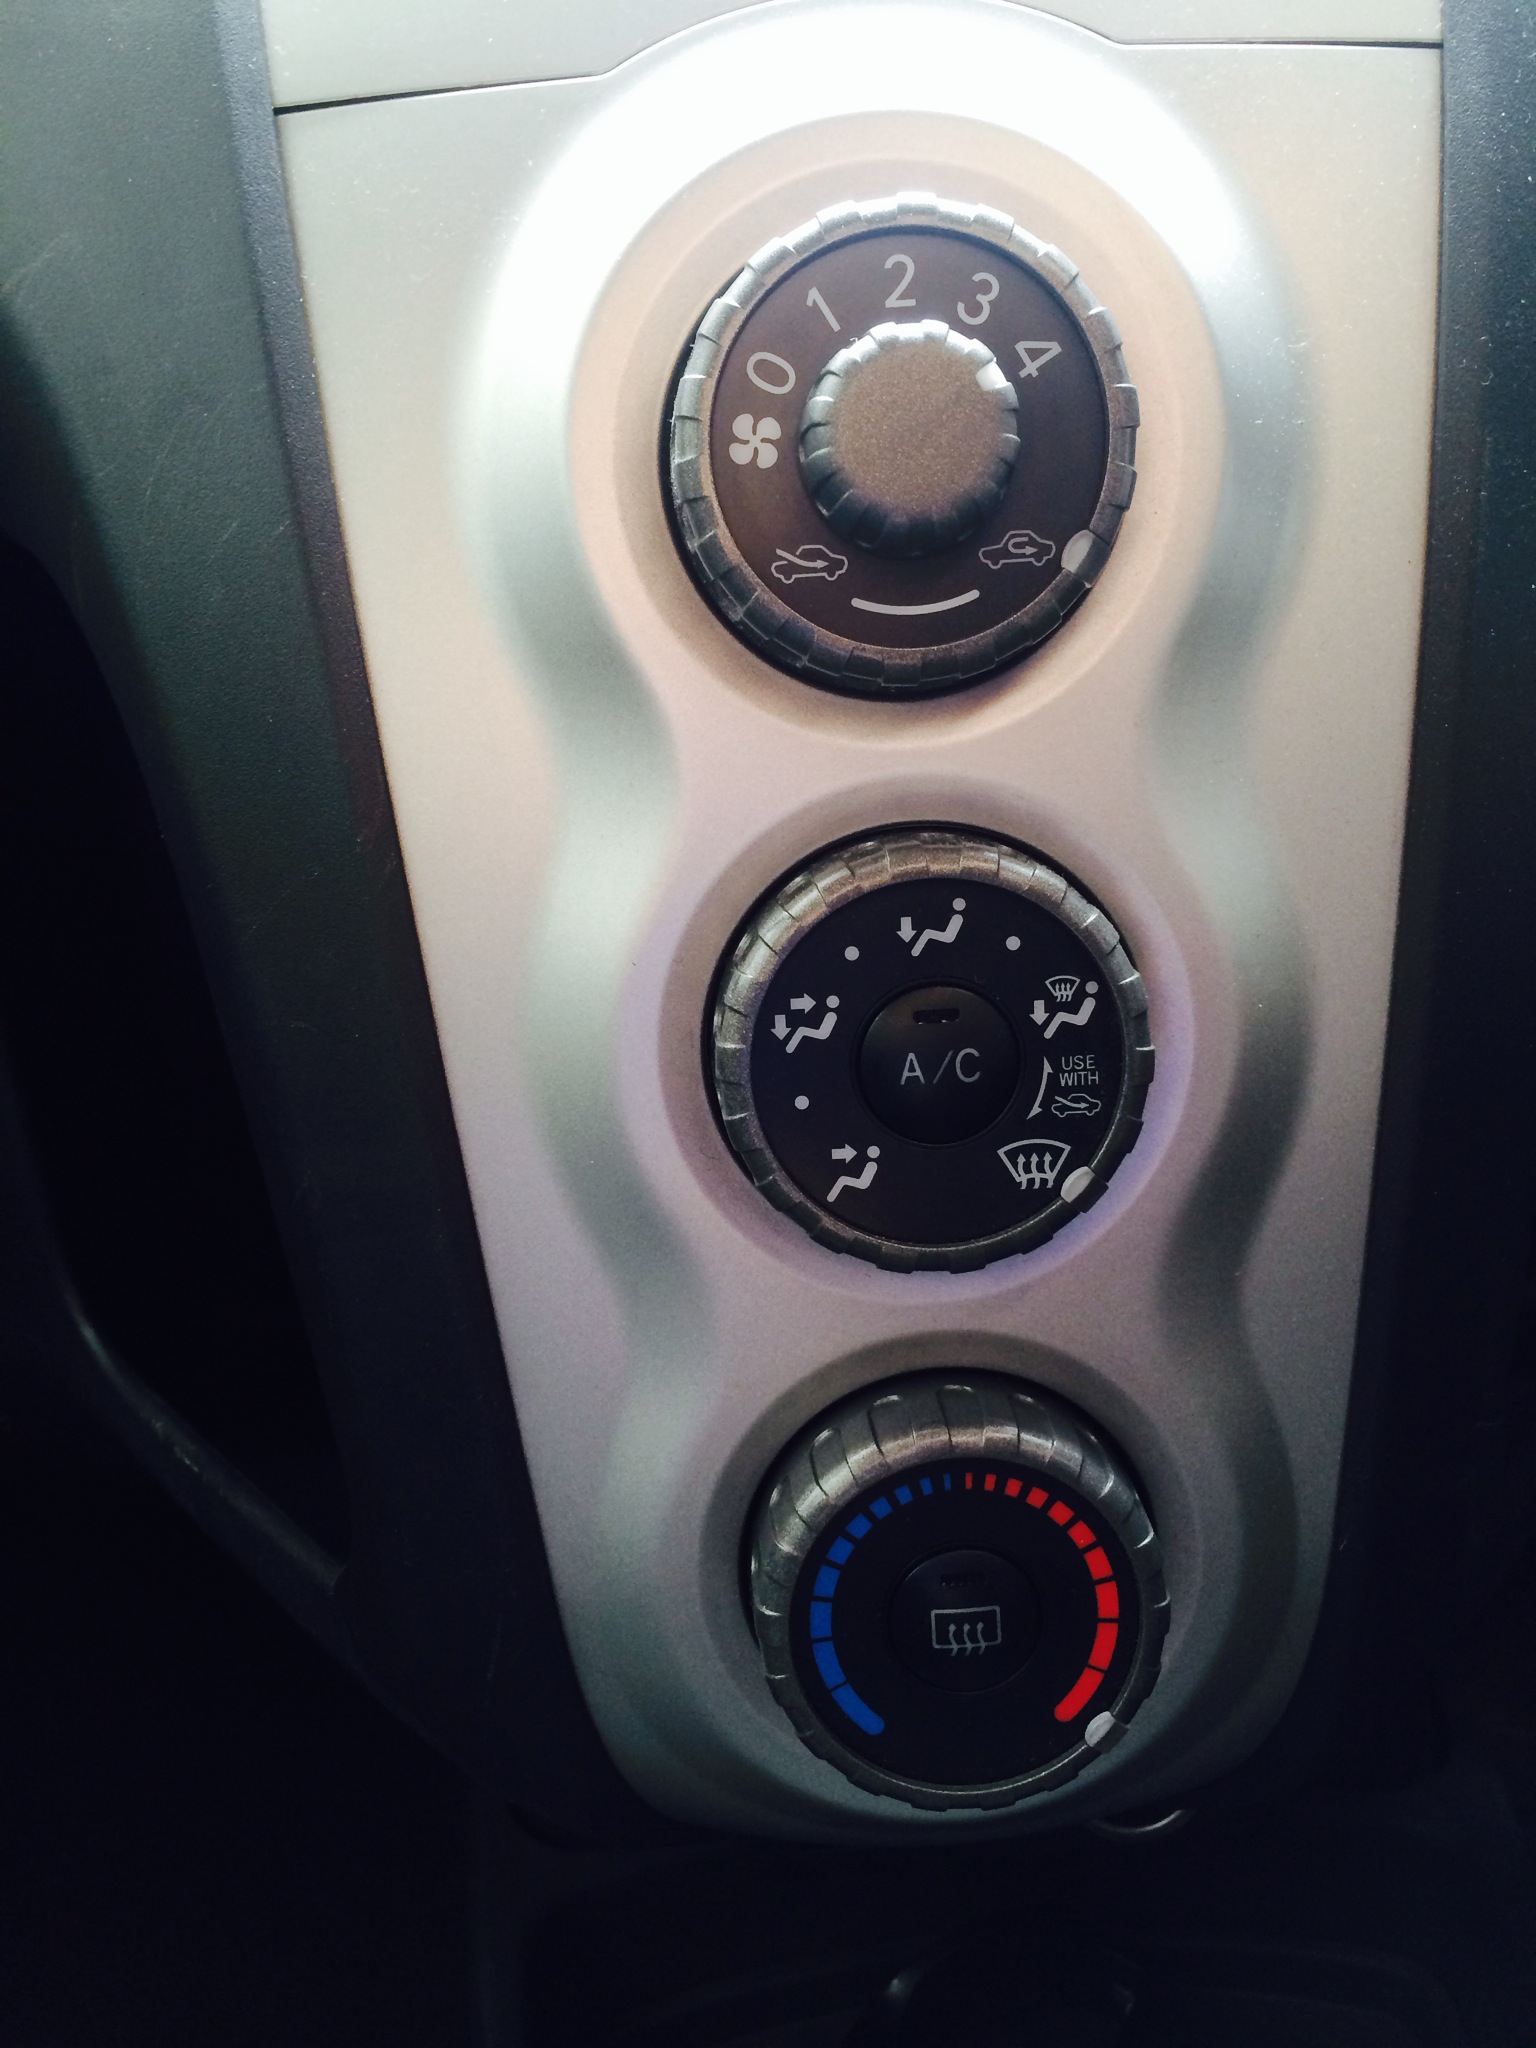 control air condition button in car - show me tell me